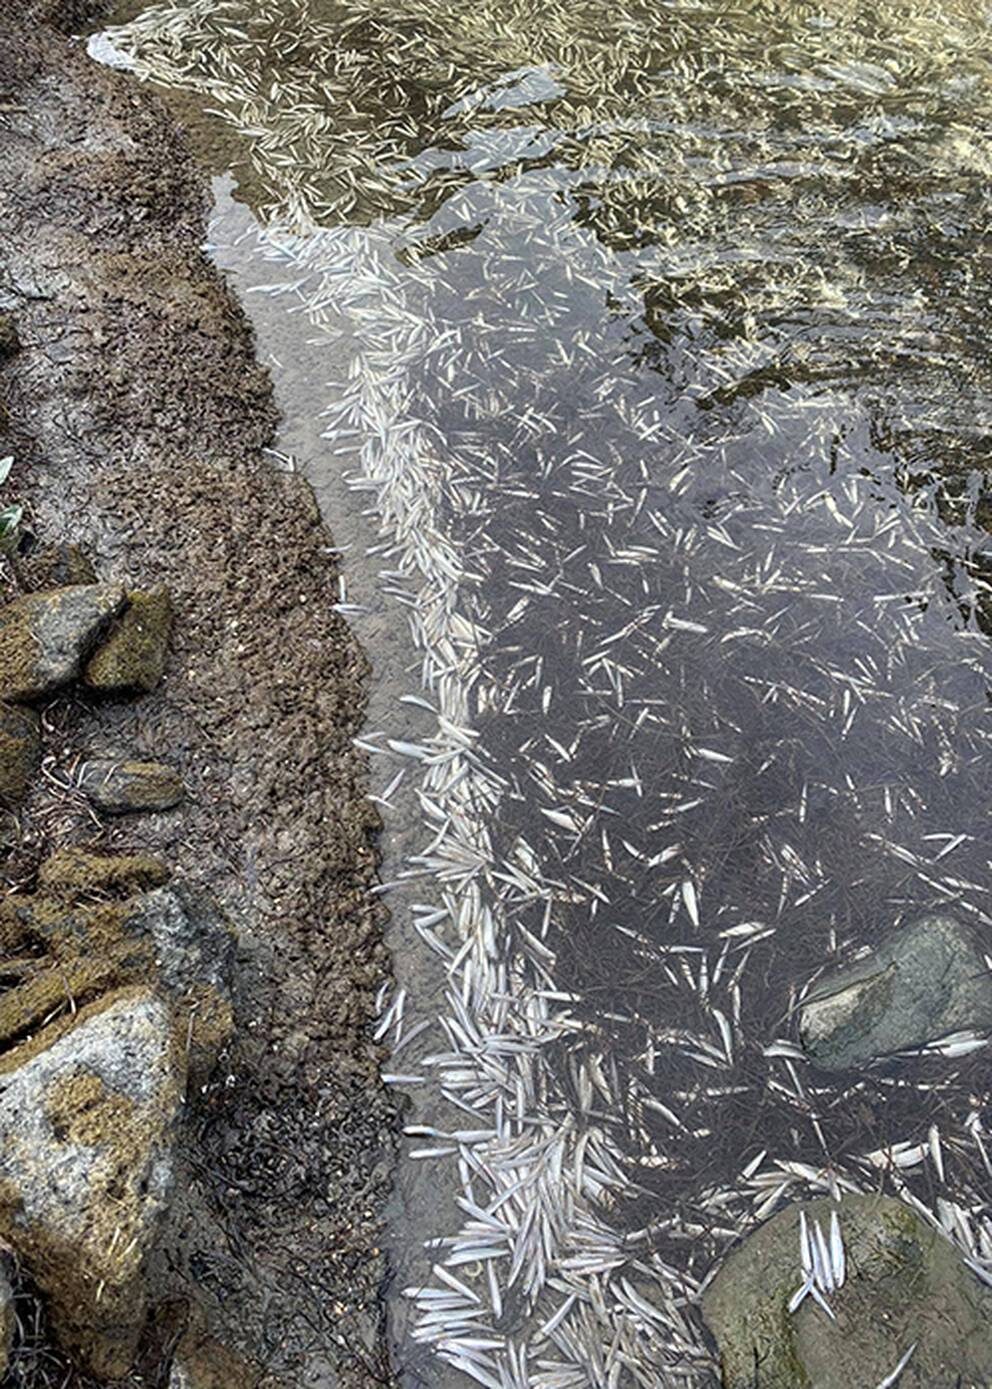 Mandy Reeves said there were thousands of fish dead across the coastline at Pine Harbour.